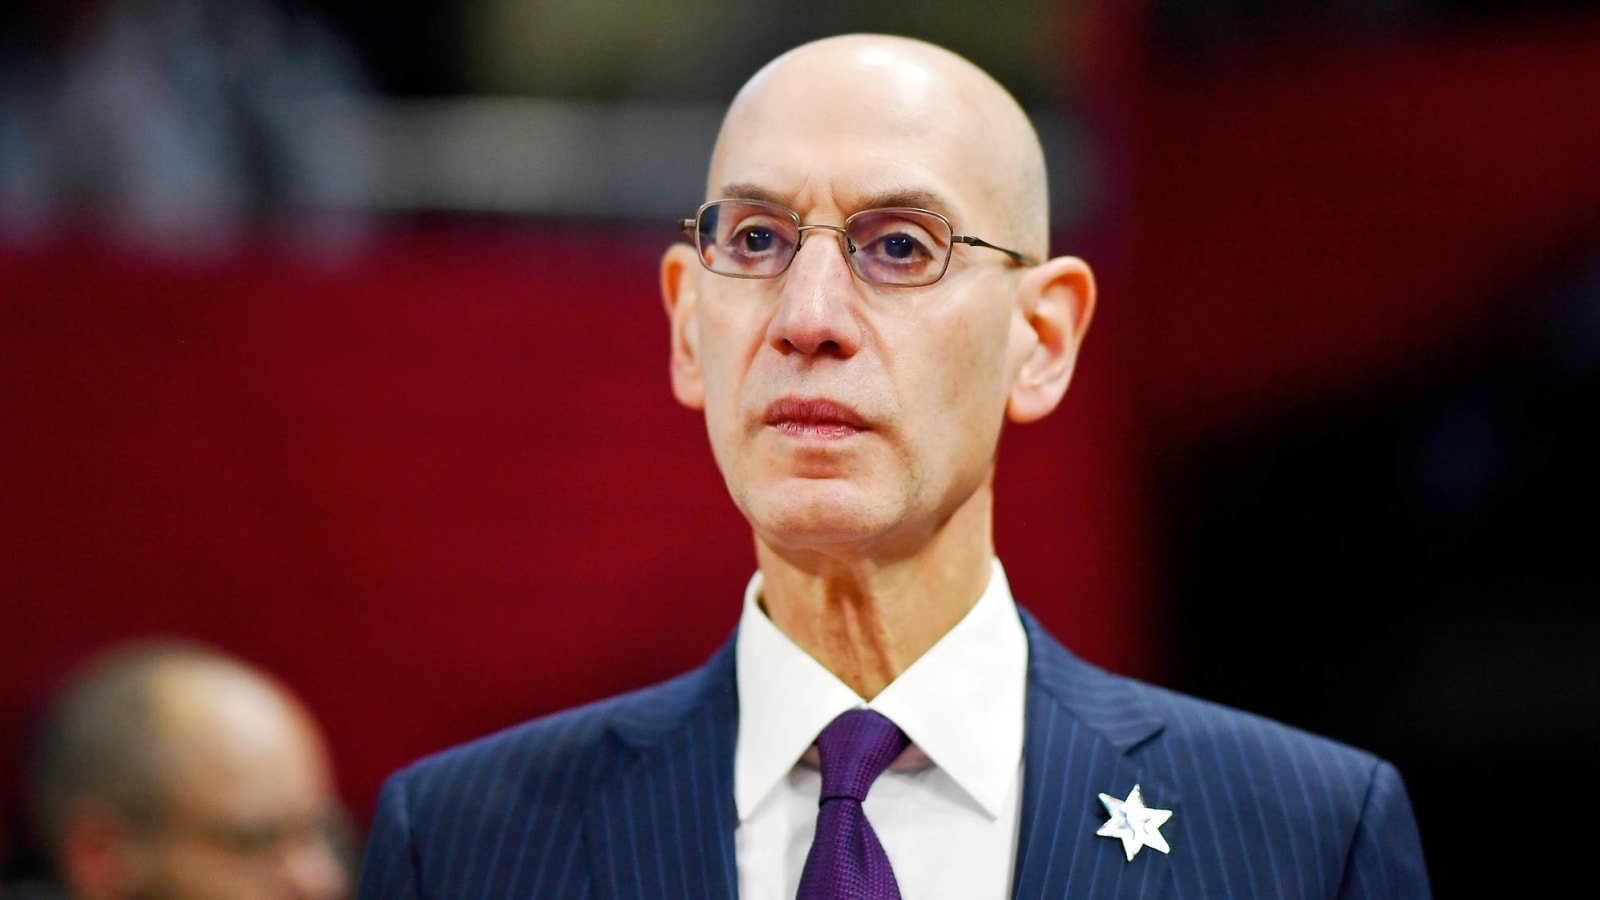 Report: NBA games could possibly resume by late July 